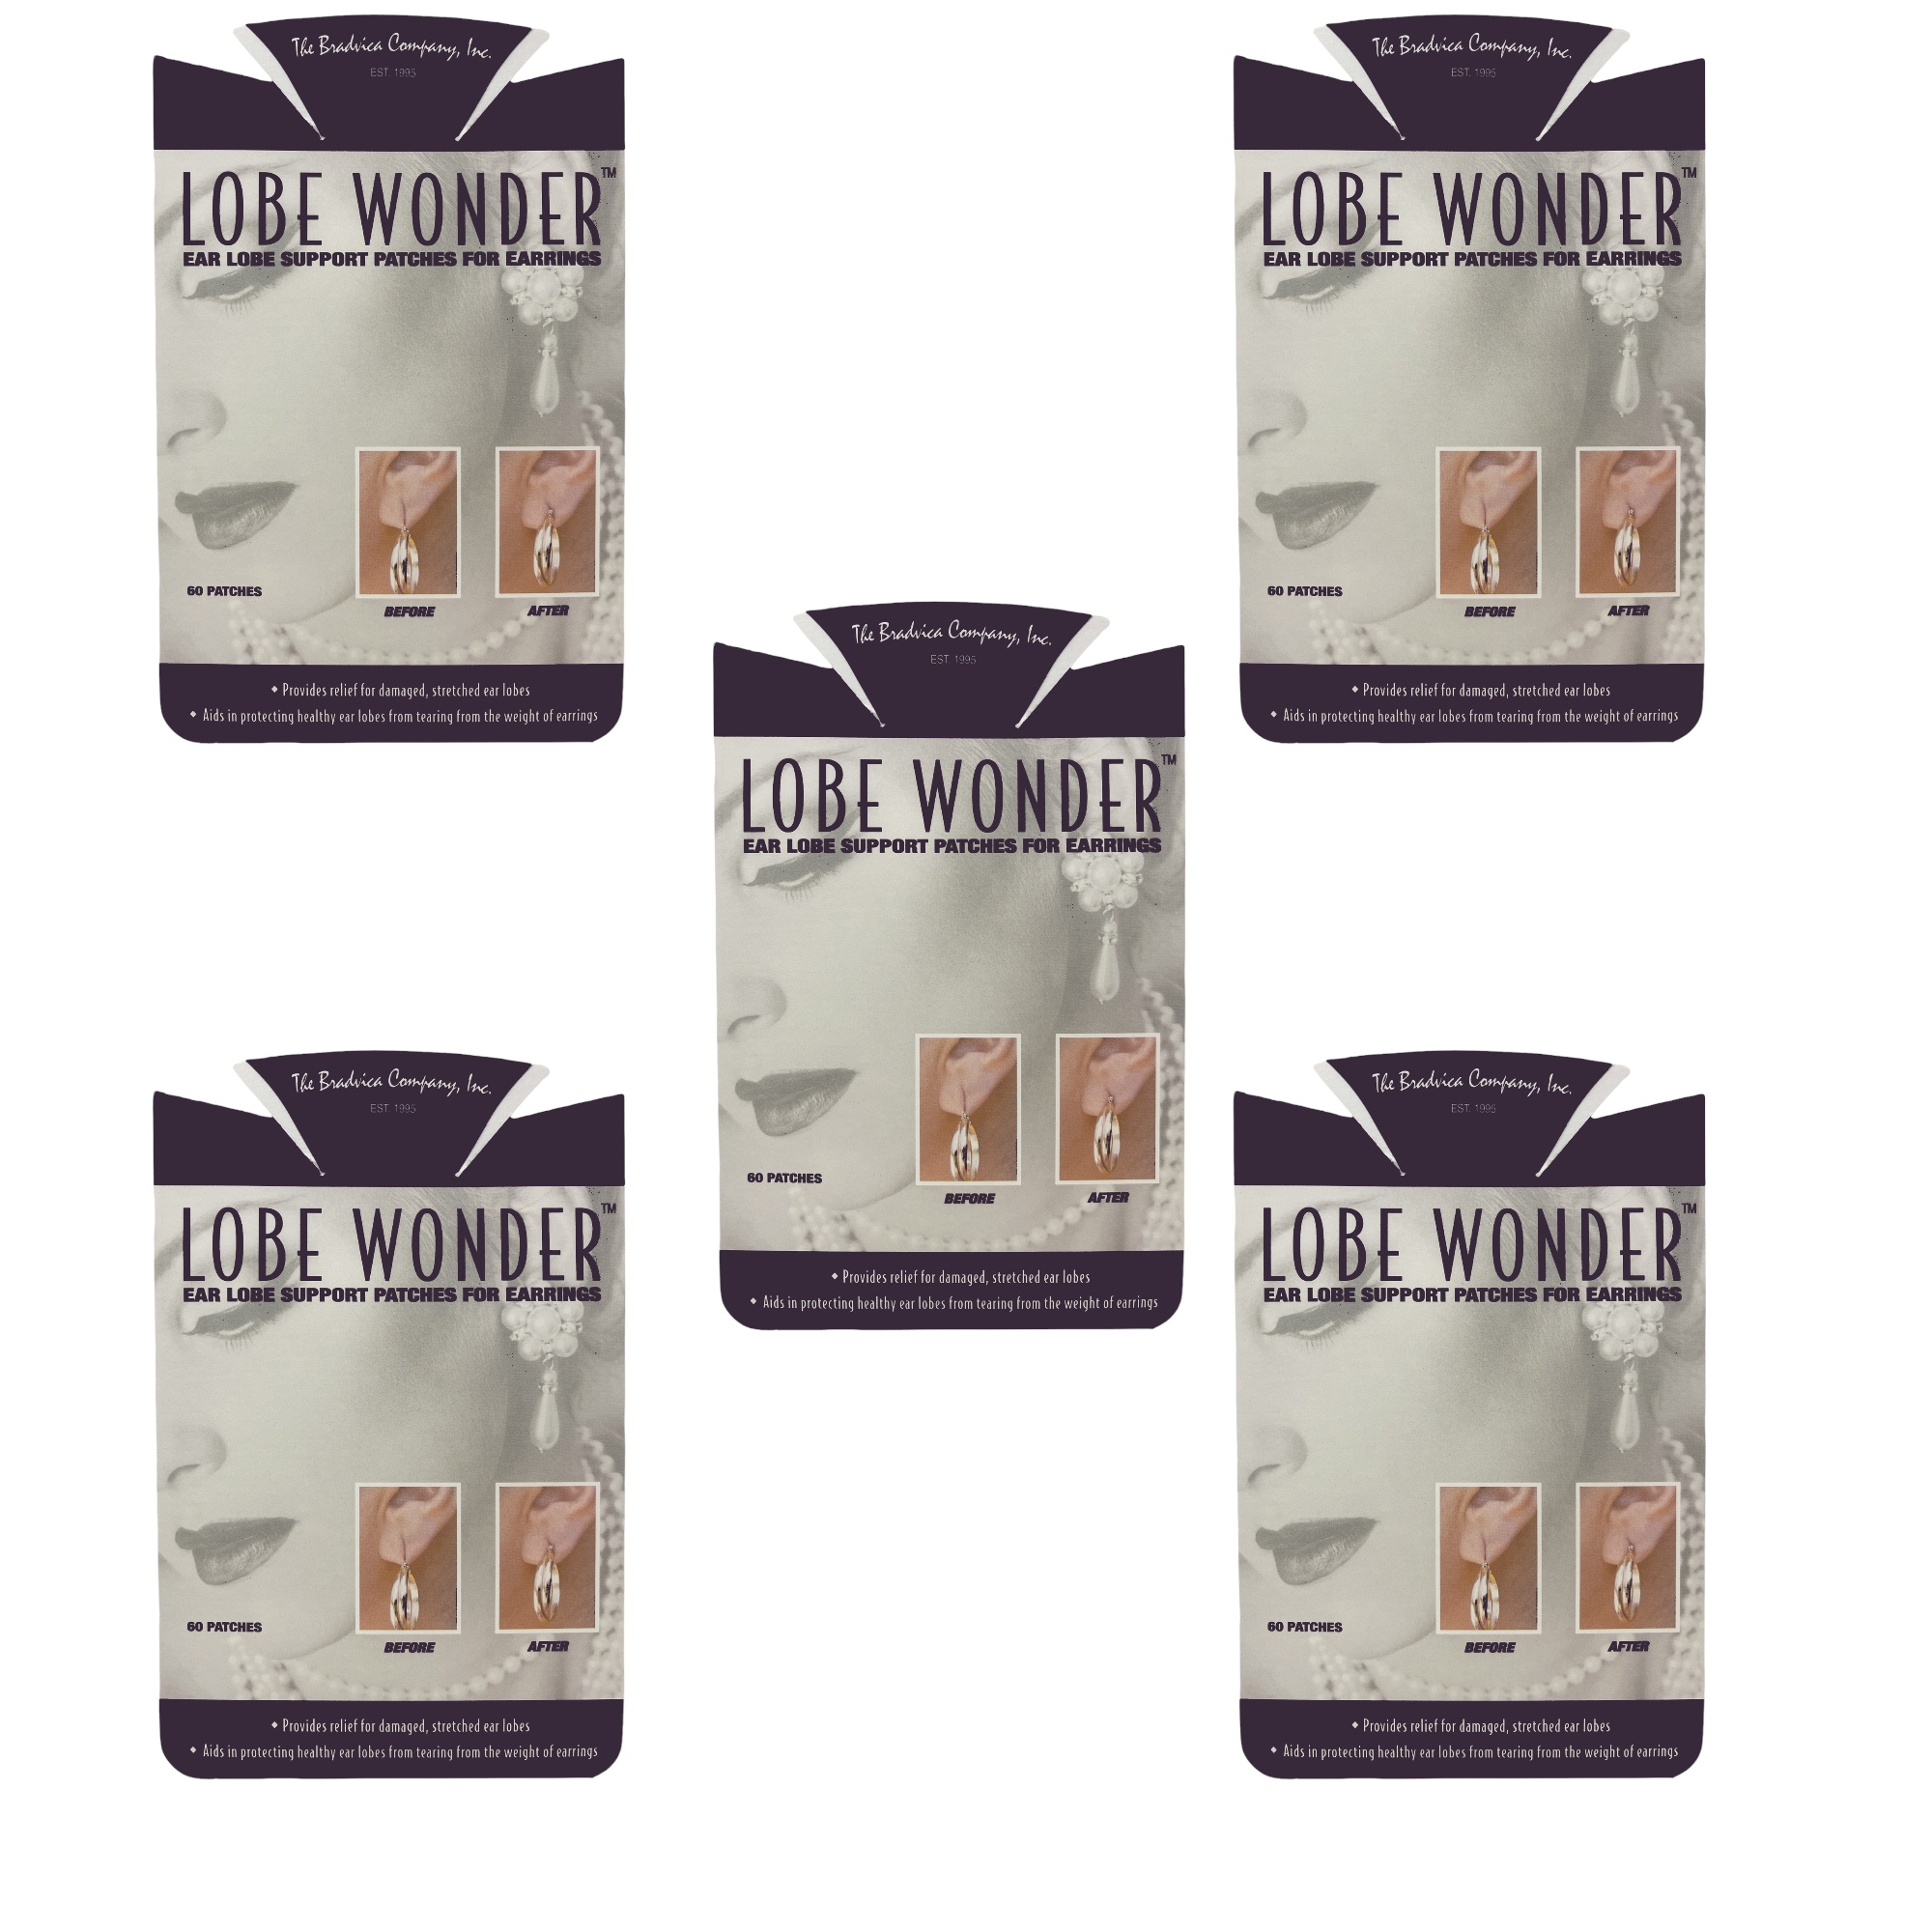 Lobe Wonder 300 Earring Support Patches - 5 Pack